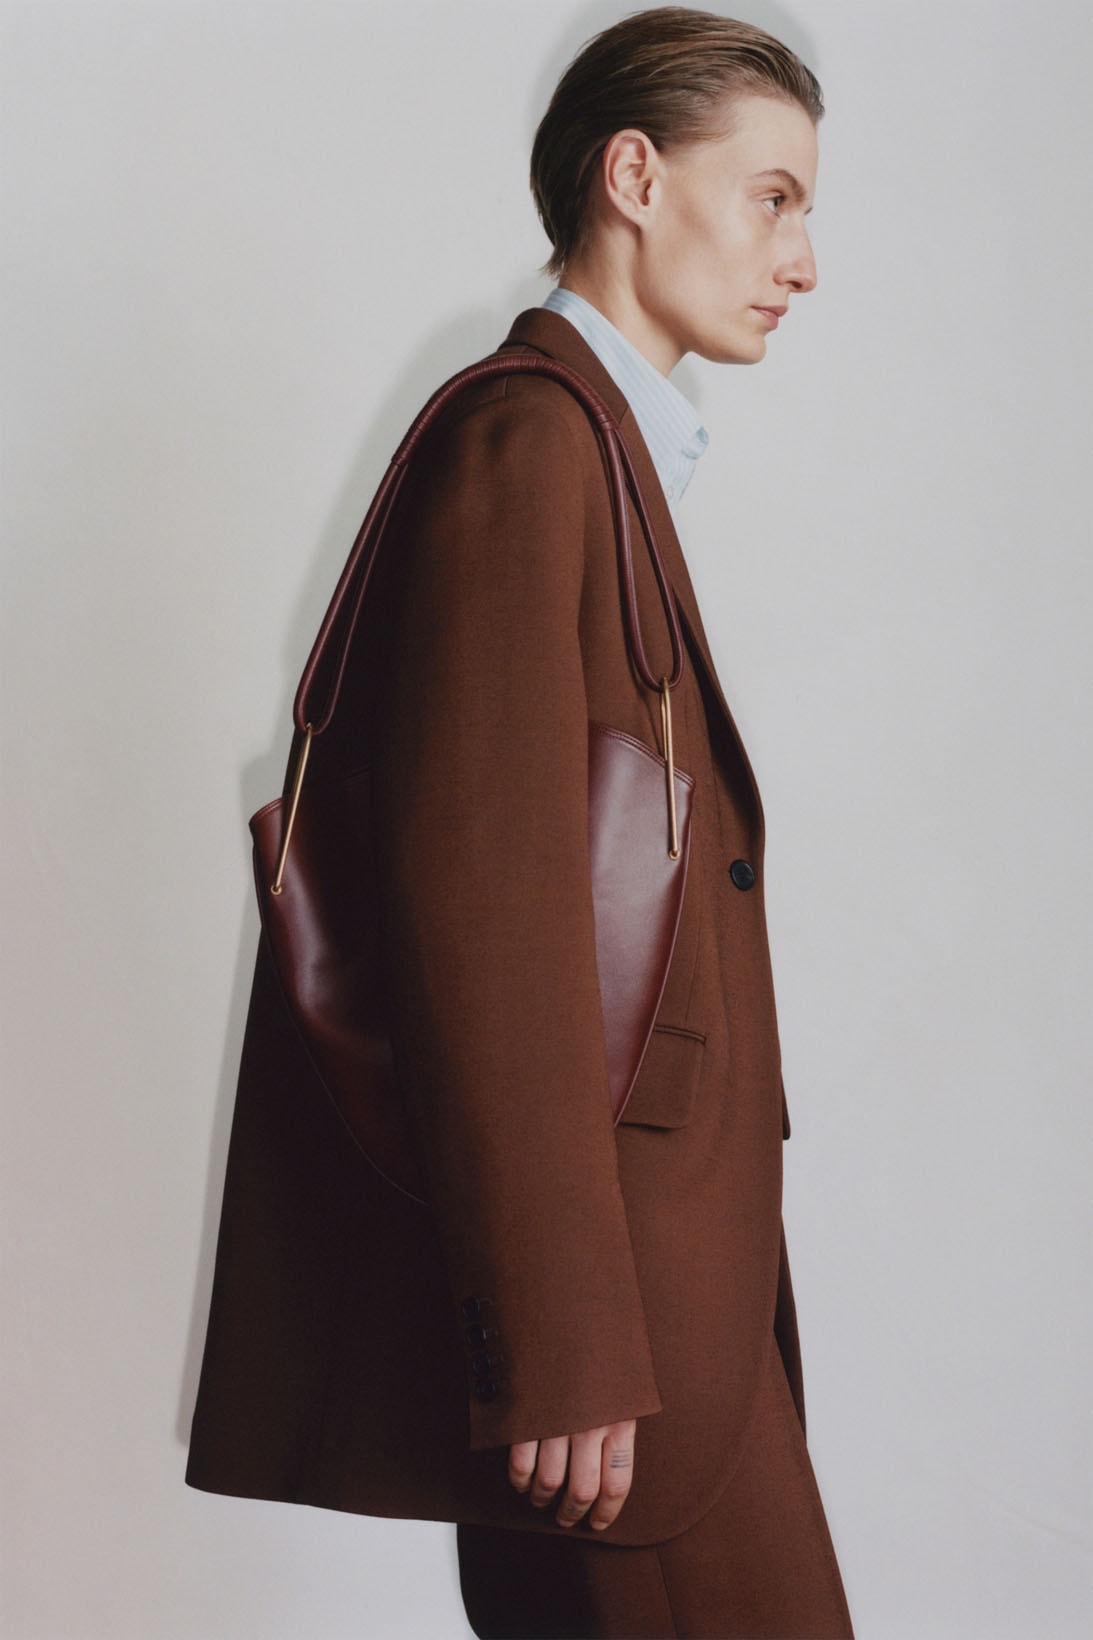 the row pre-fall collection lookbook minimalism mary-kate ashley olsen suits blazers jackets 